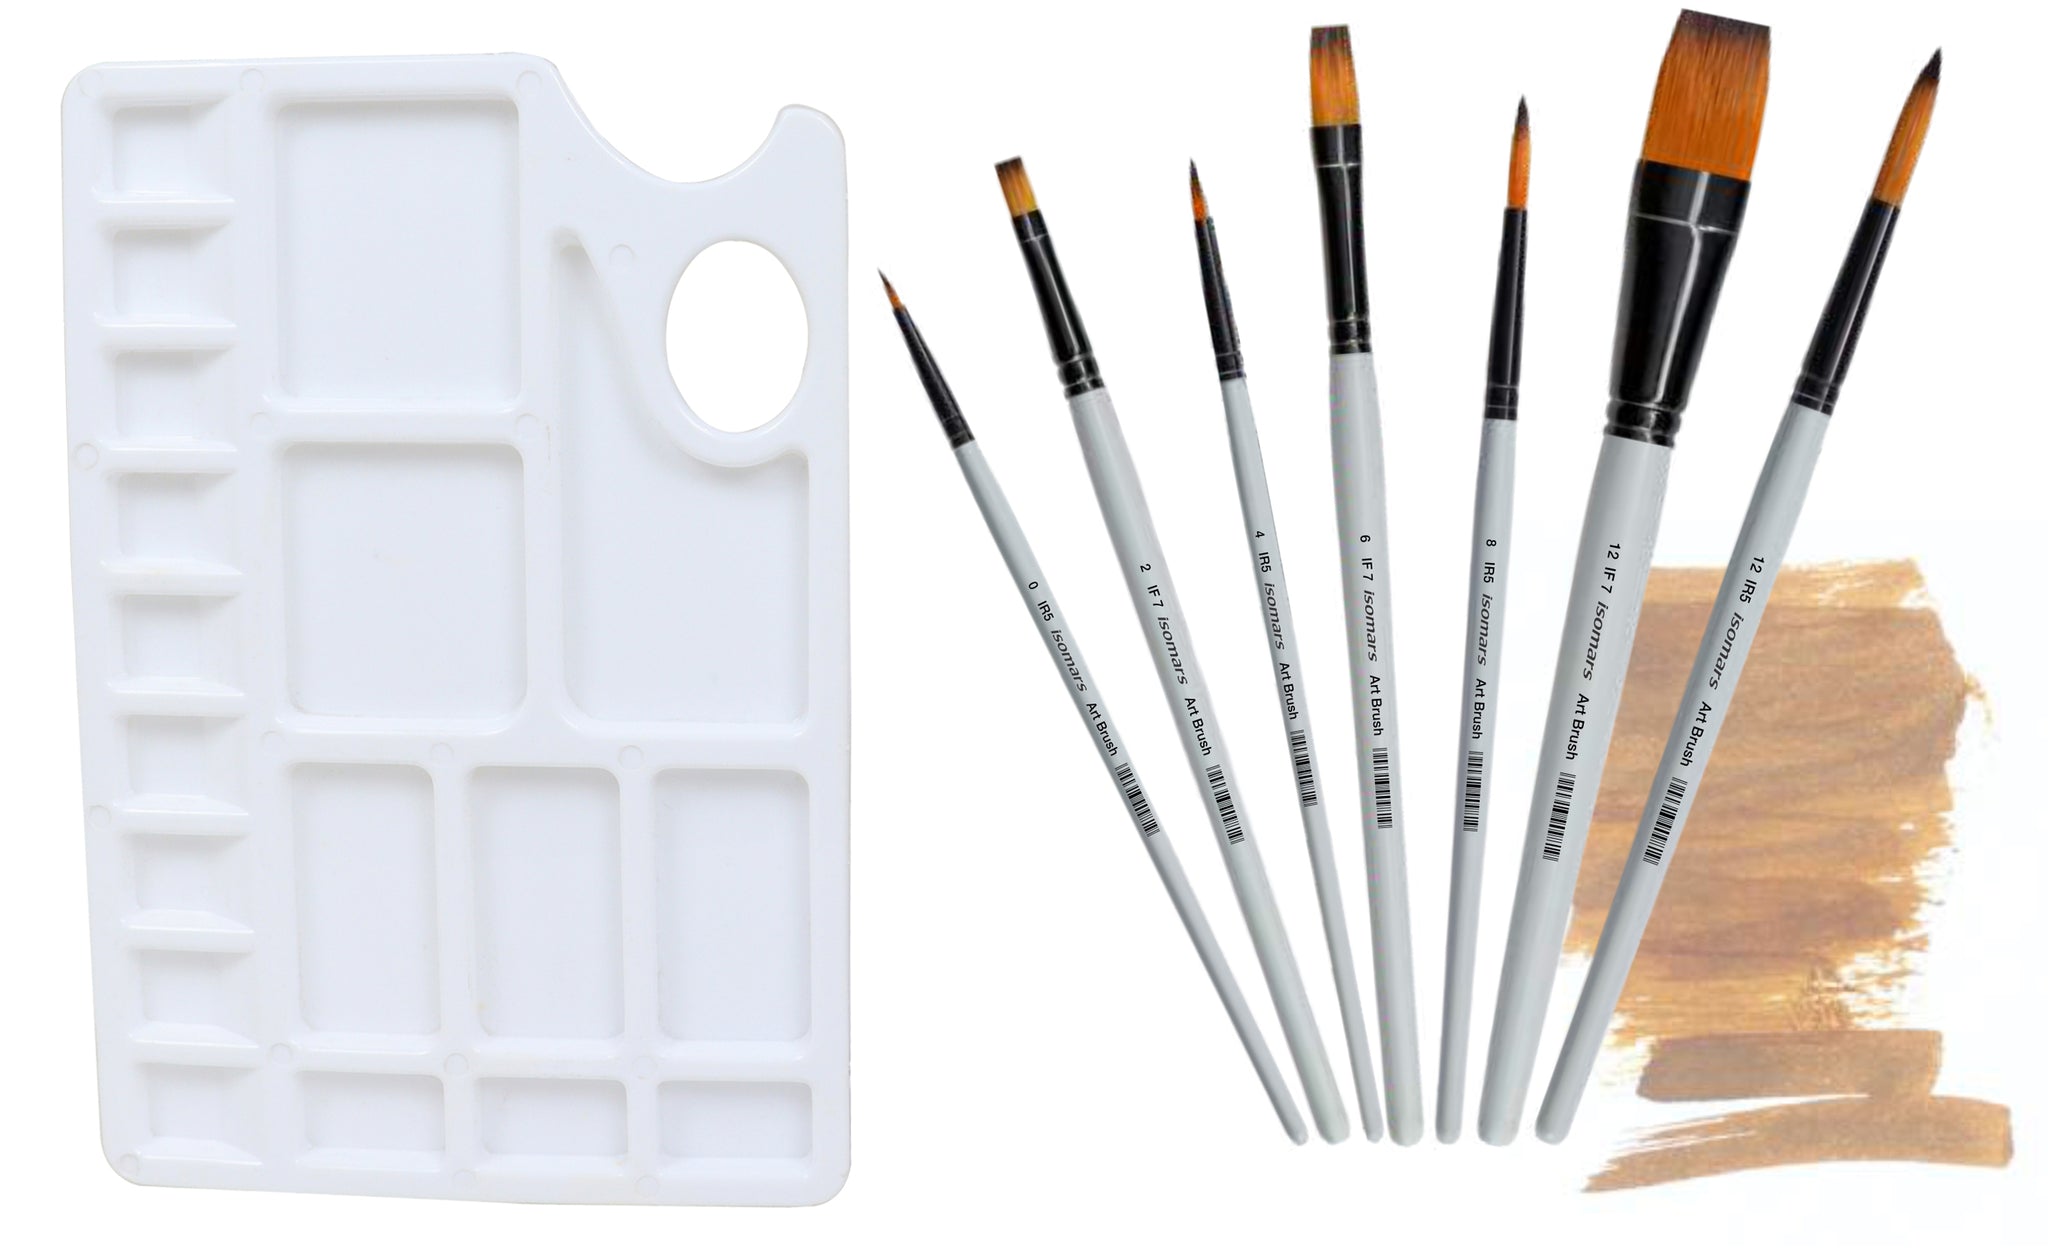 Isomars Drawing Brush Set for PaintIng Set of 7 with A4 Sketch Pad & C